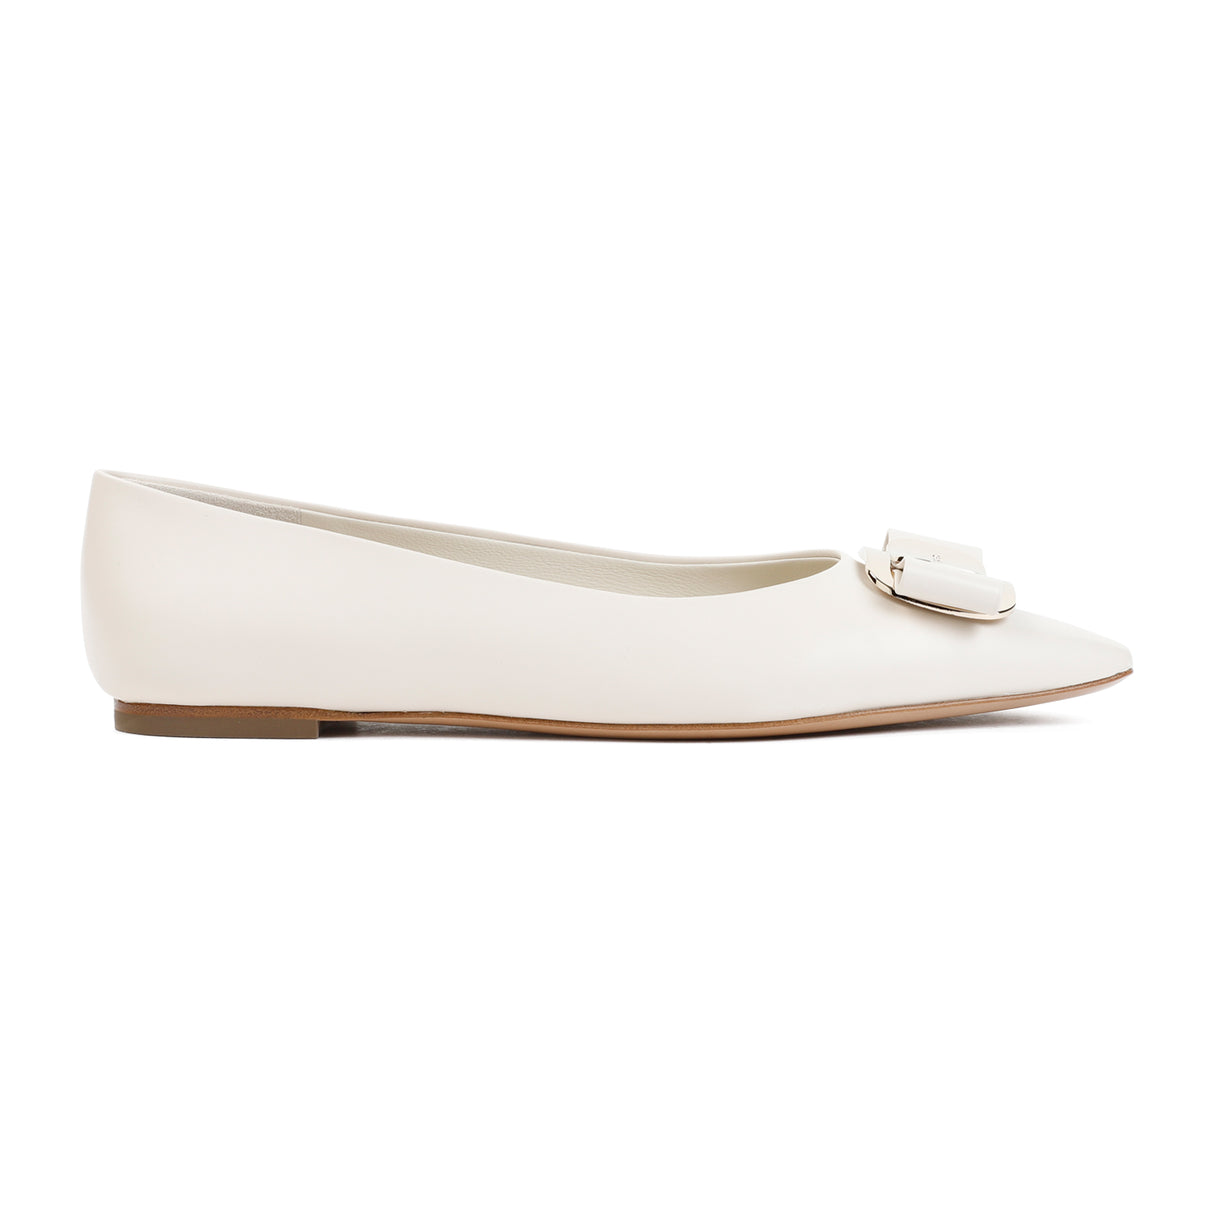 Ballerina Flats for Women - Nude & Neutral Leather